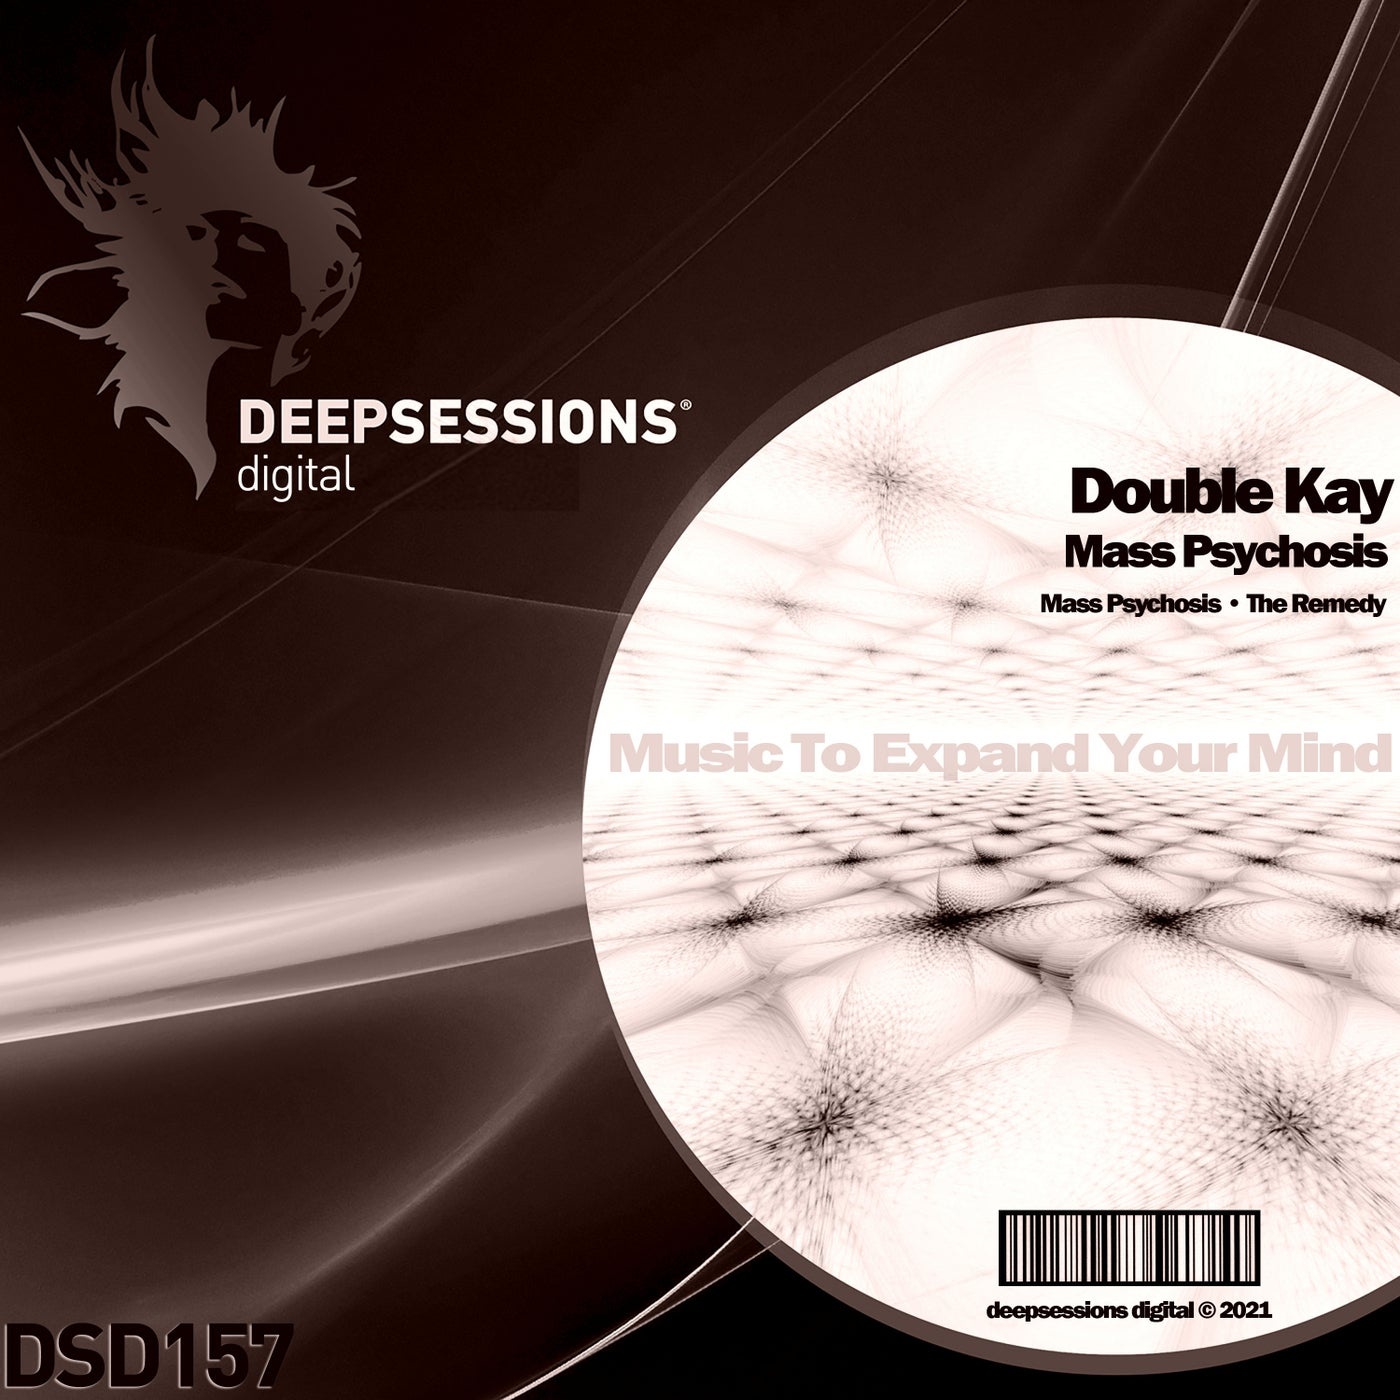 Double Kay - Mass Psychosis [DSD157]